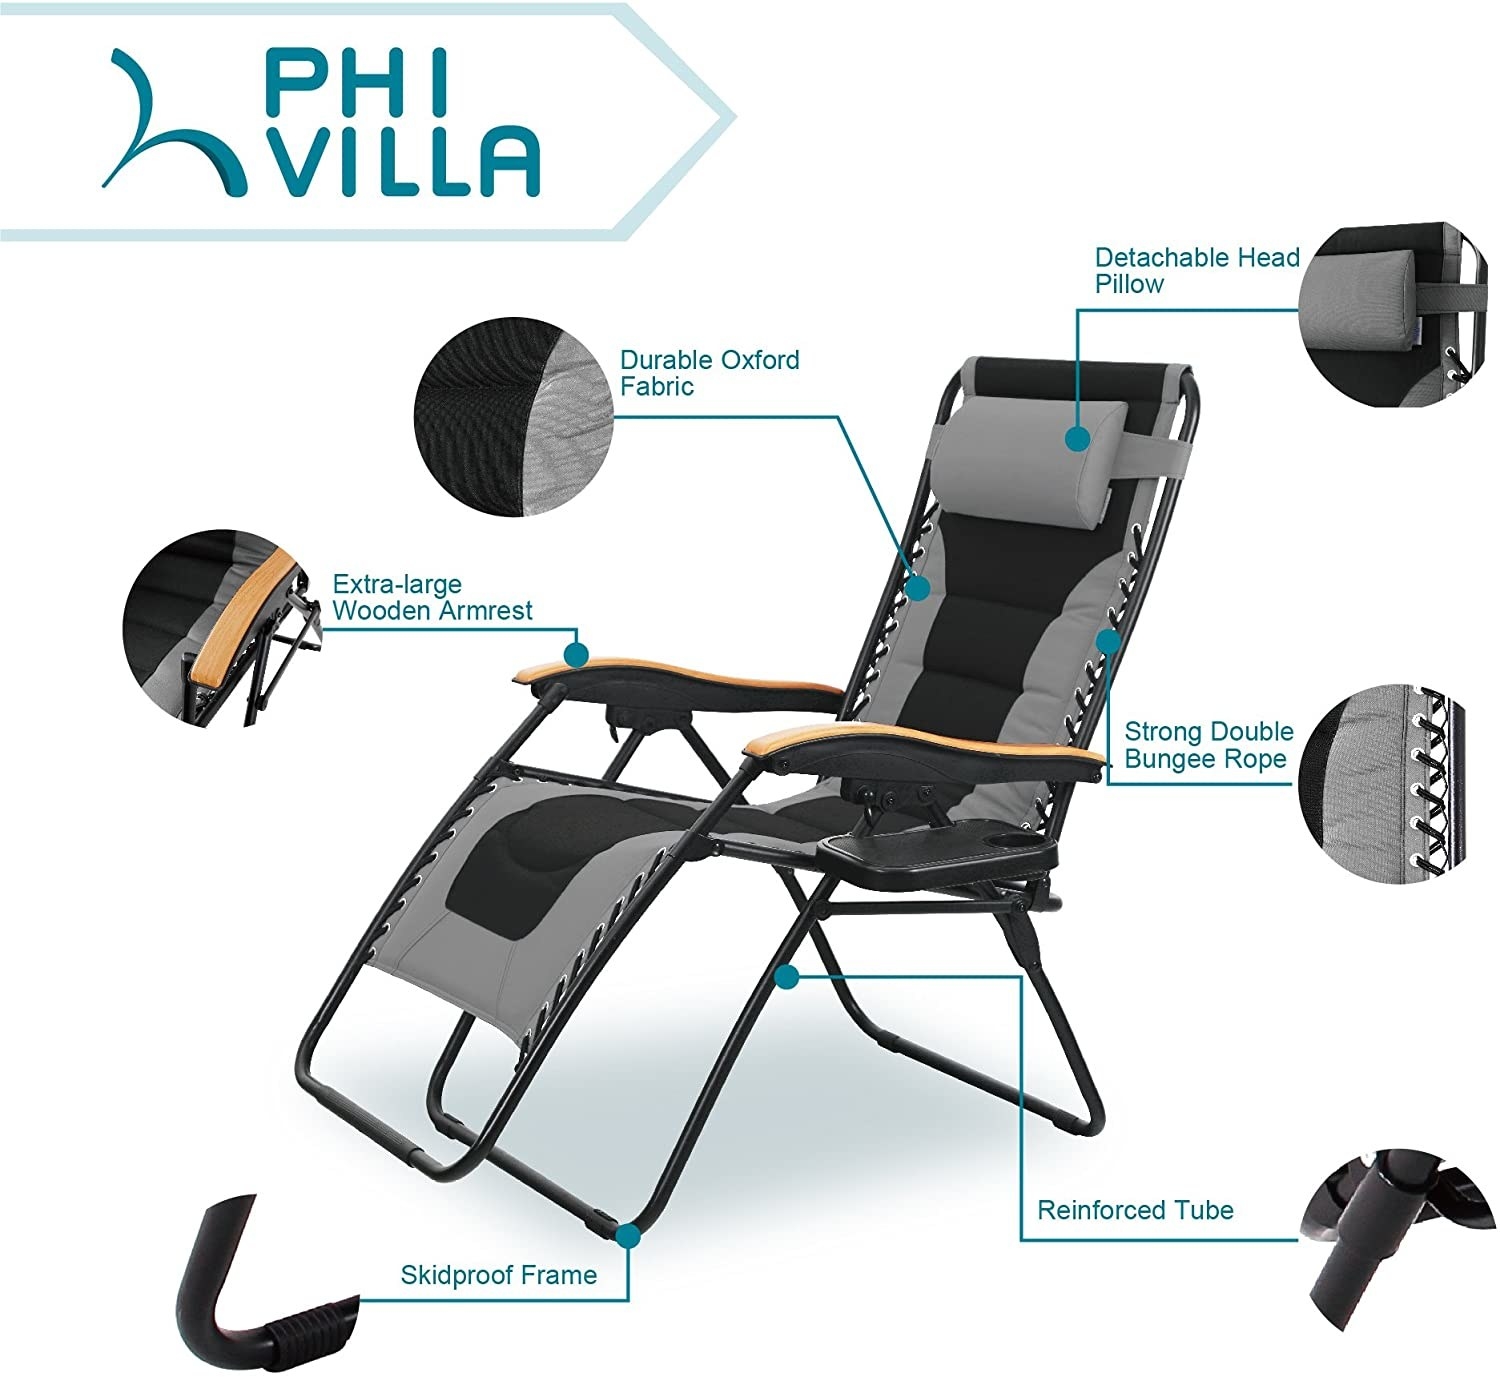 Diagram showing the chair and all its features, like the extra large wooden armrests, skidproof frame, detachable head pillow, and reinforced tubing